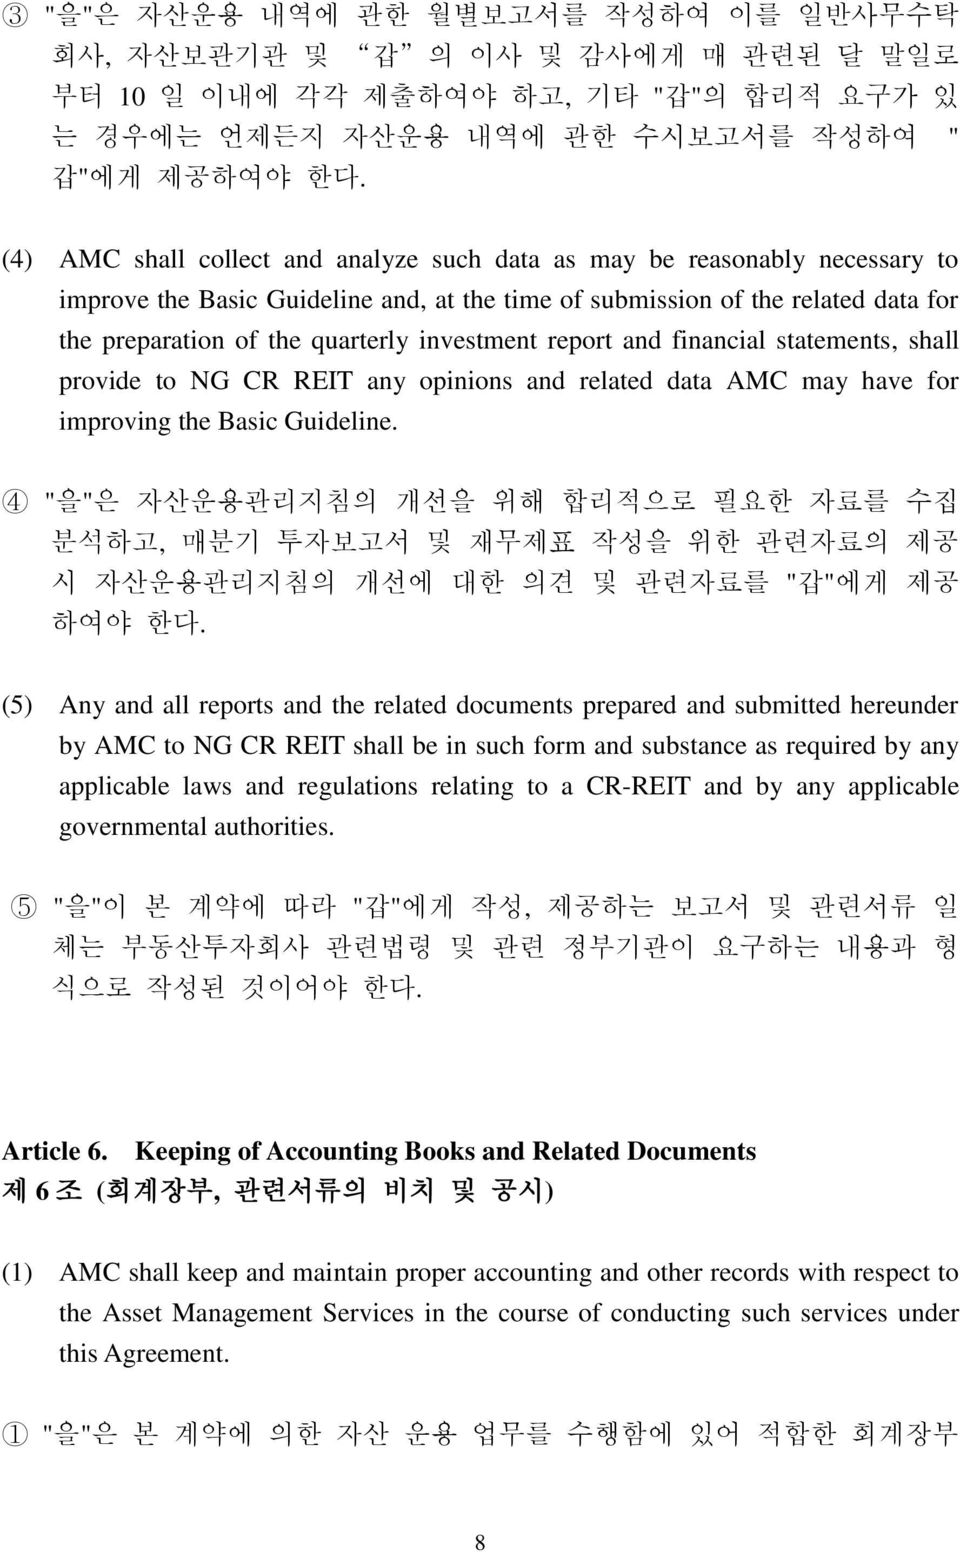 investment report and financial statements, shall provide to NG CR REIT any opinions and related data AMC may have for improving the Basic Guideline.